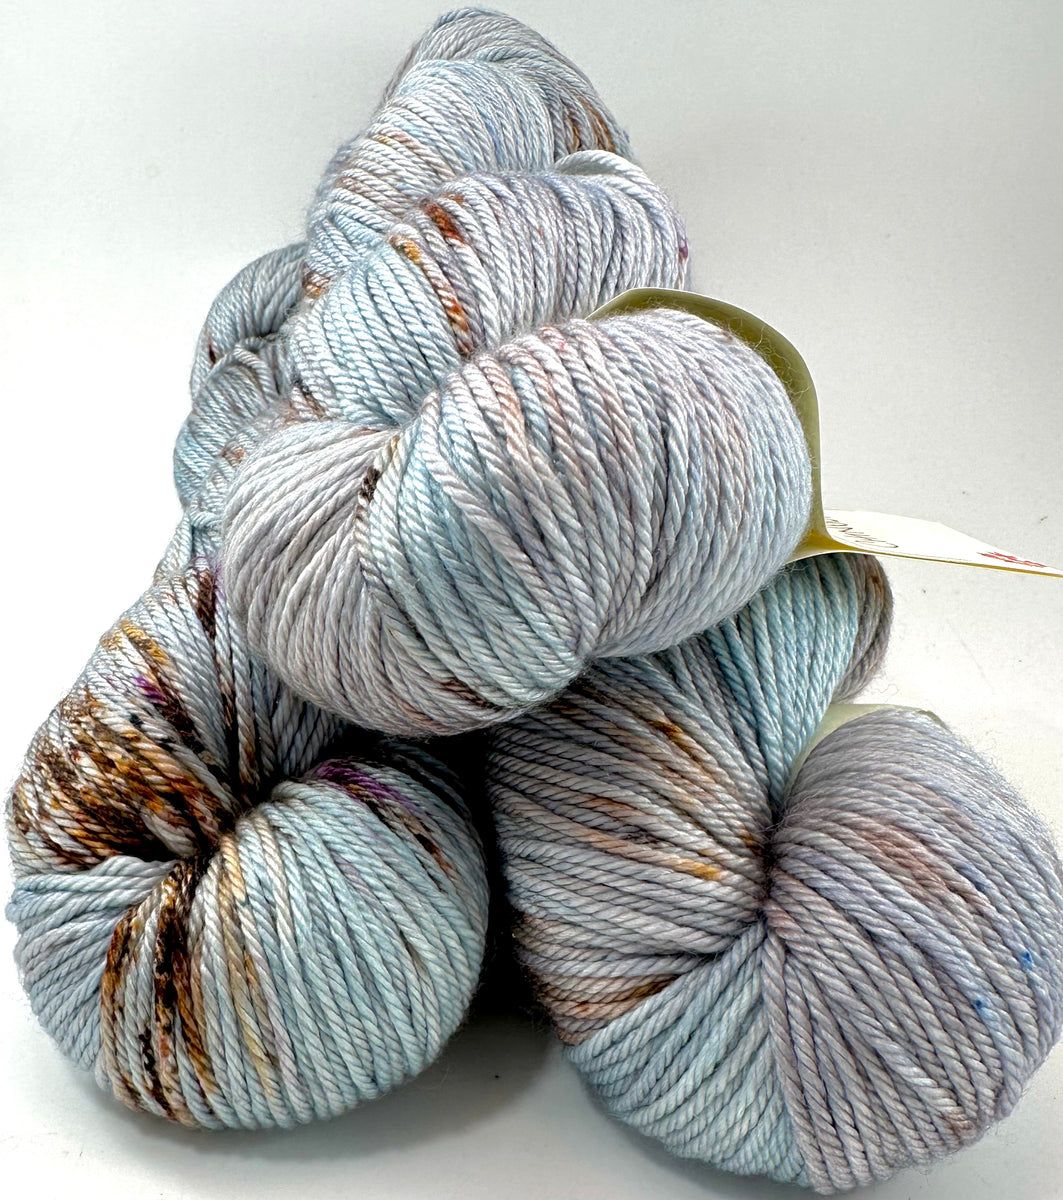 Hand Dyed Yarn Scattered Grey Silver Brown Black Speckled Merino